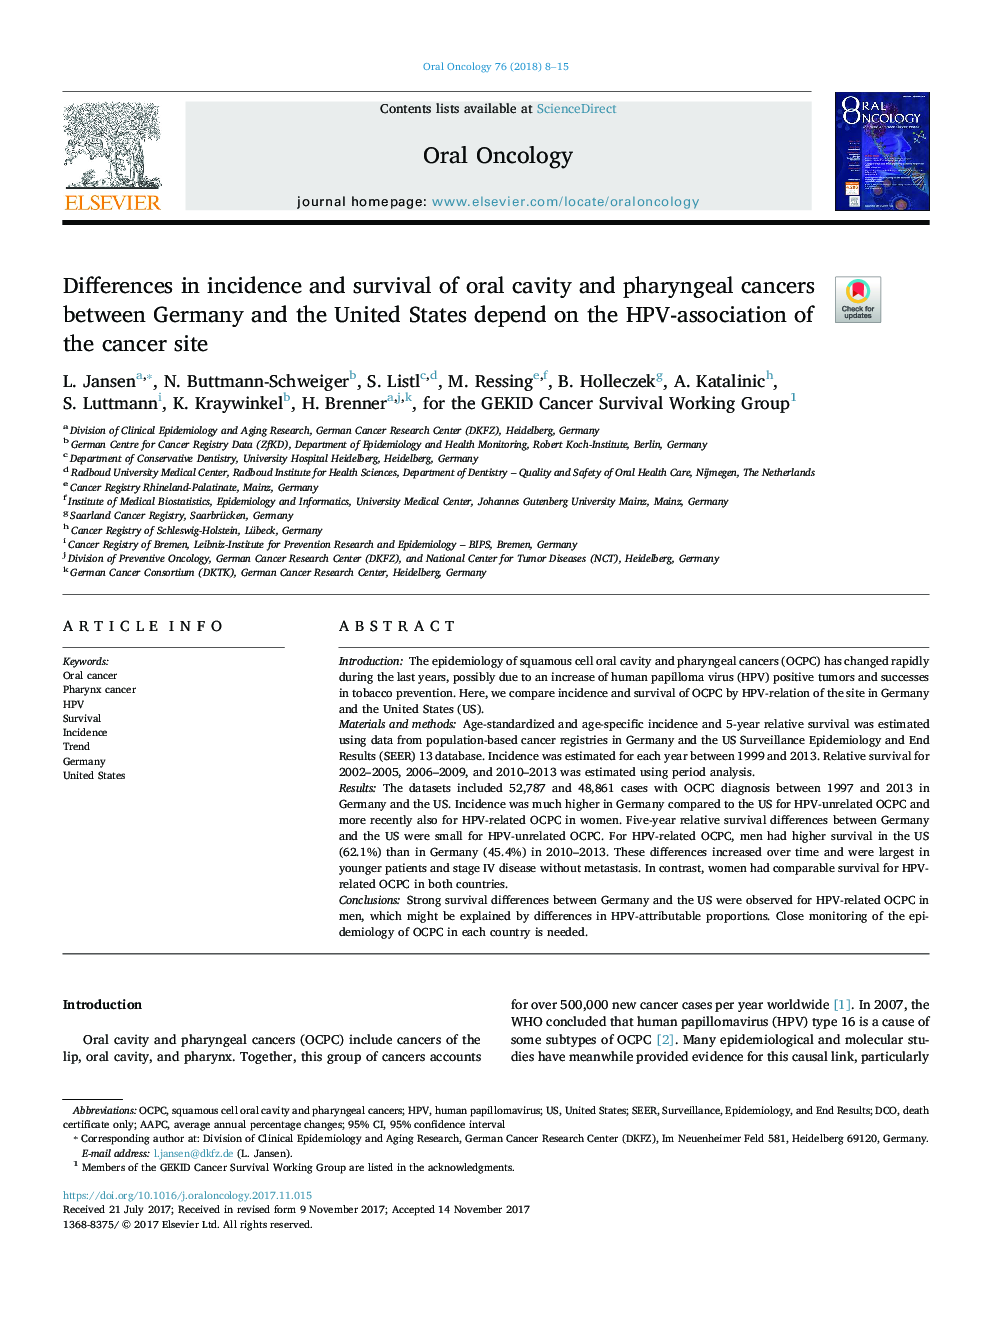 Differences in incidence and survival of oral cavity and pharyngeal cancers between Germany and the United States depend on the HPV-association of the cancer site